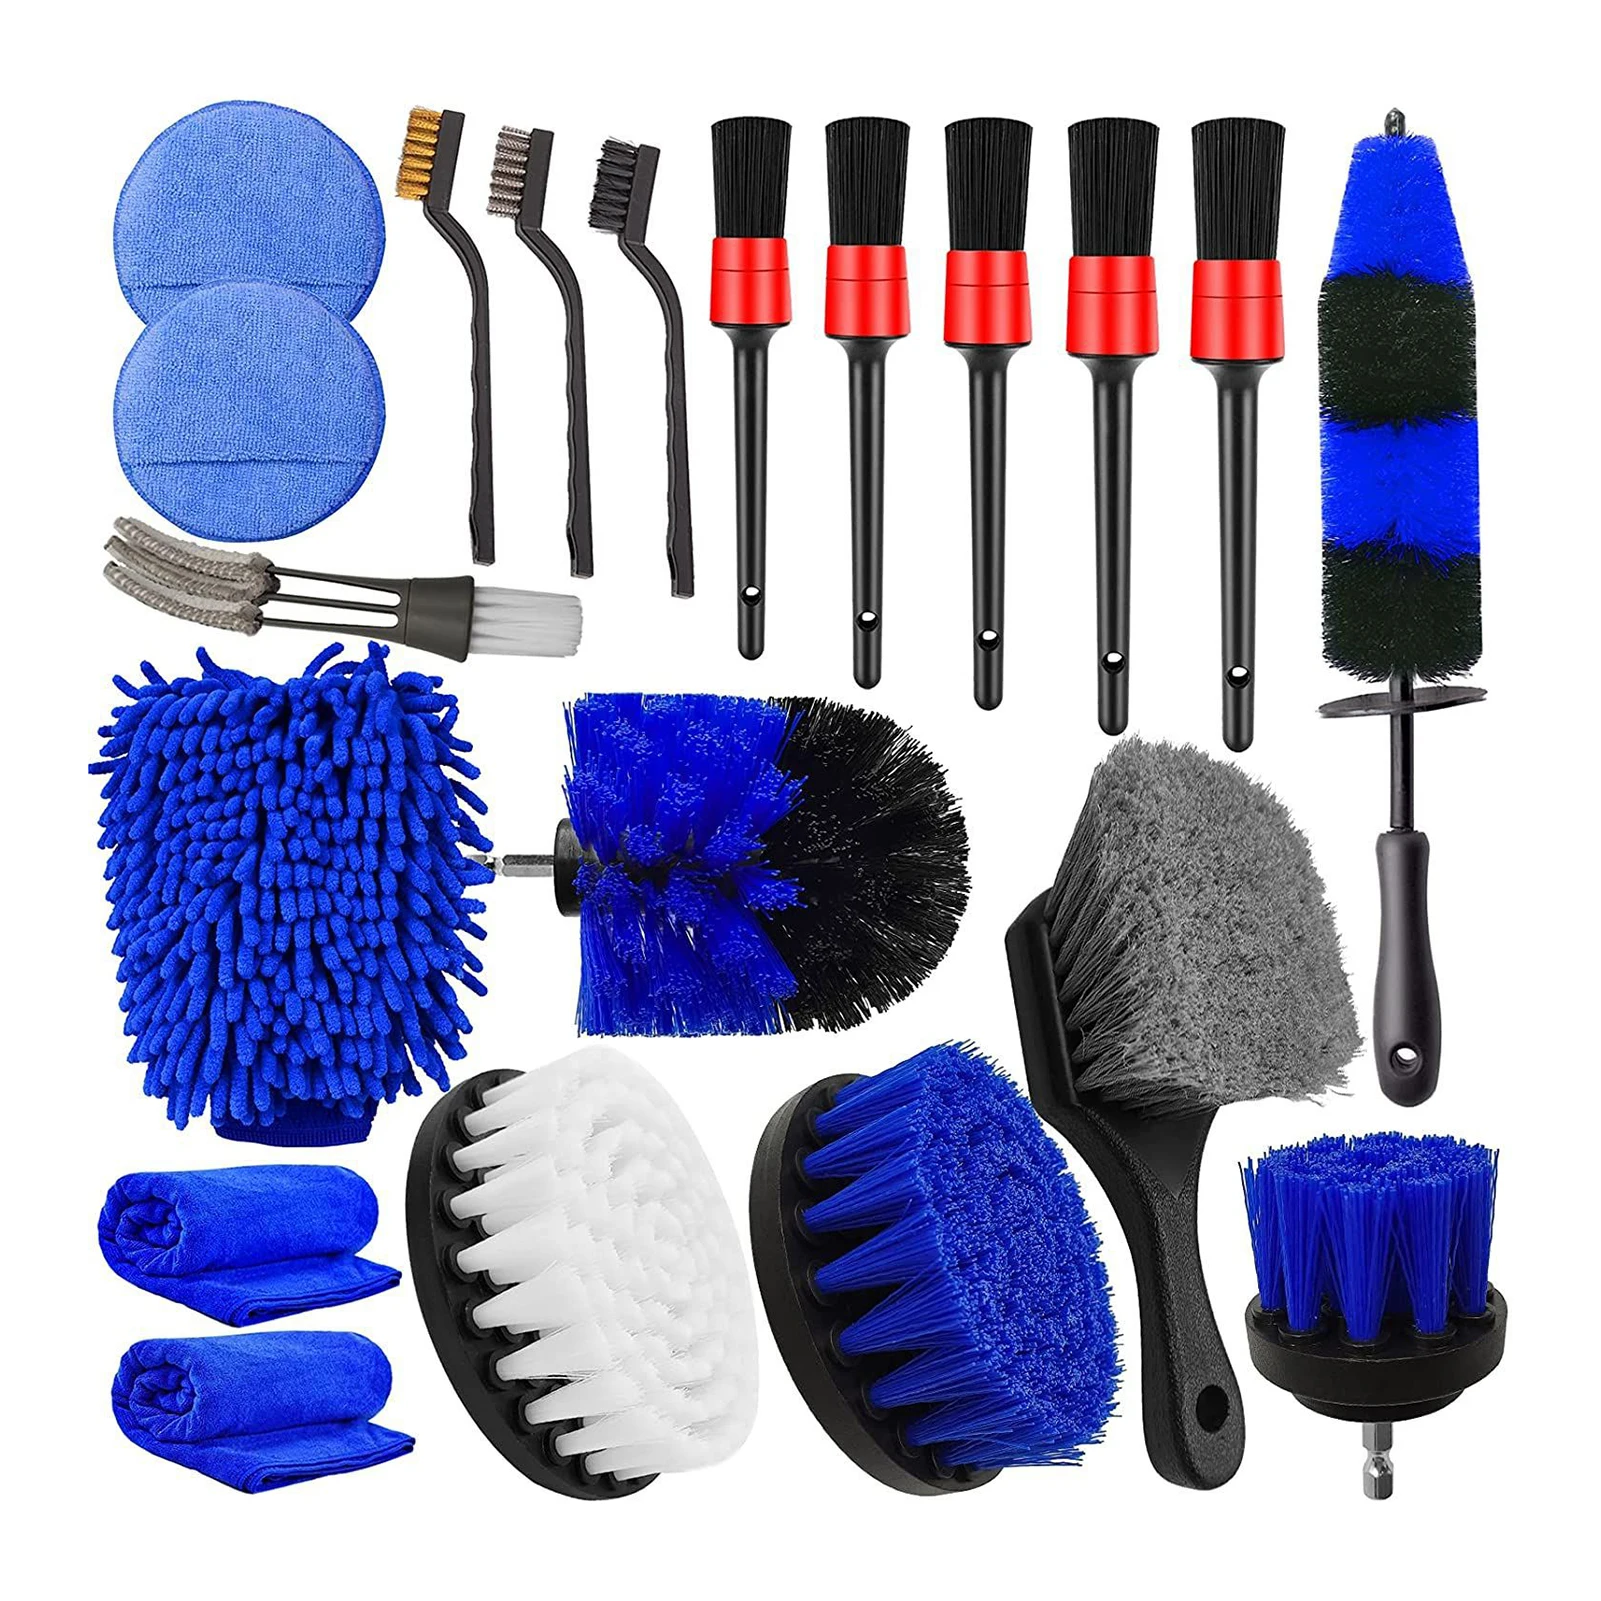 

20 Pcs Car Detailing Kit Long Soft Tire Brush Professional Car Wash Kit for Cleaning Dirty Tires Releases Dirt and Road Grime